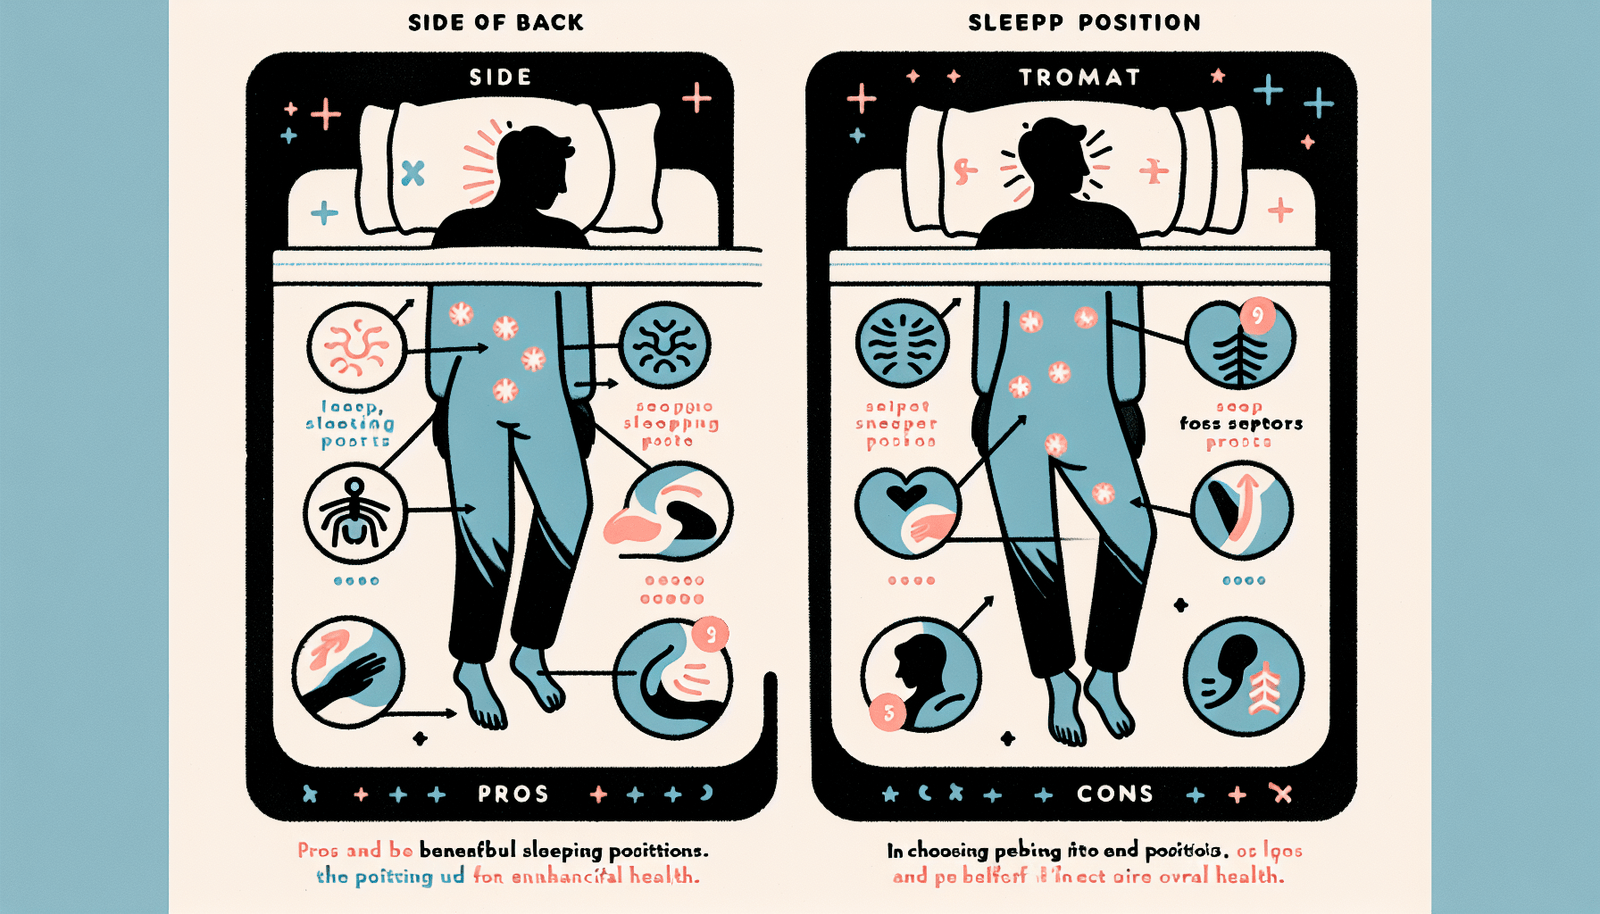 What Is The Best Sleeping Position For Health?